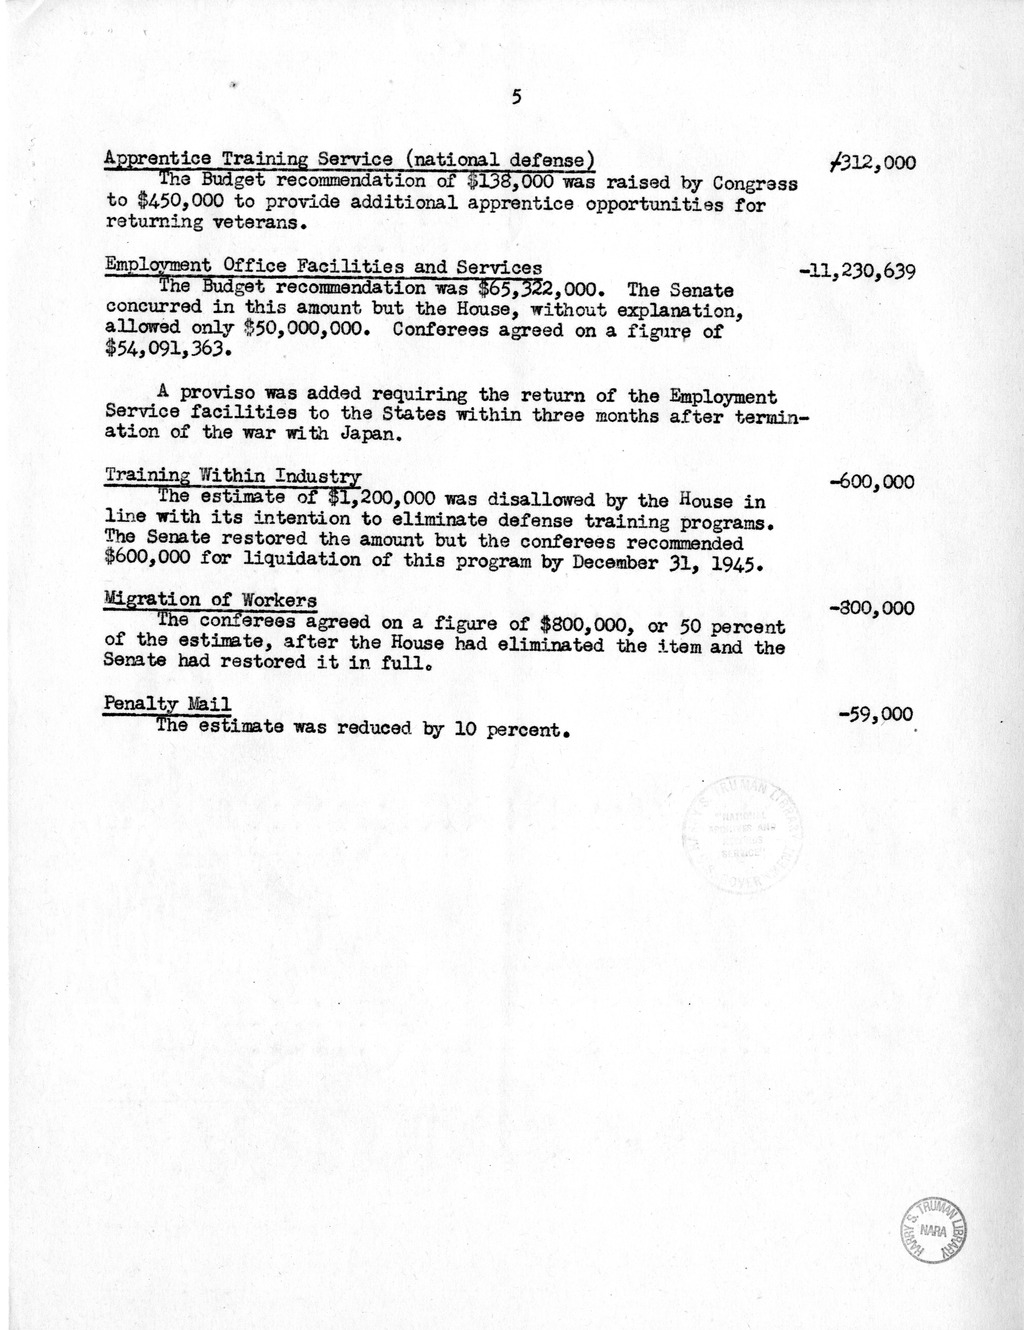 Memorandum from Harold D. Smith to M. C. Latta, H.R. 3199, Making Appropriations for the Department of Labor, the Federal Security Agency, and Related Independent Agencies, for the Fiscal Year Ending June 30, 1946, with Attachments